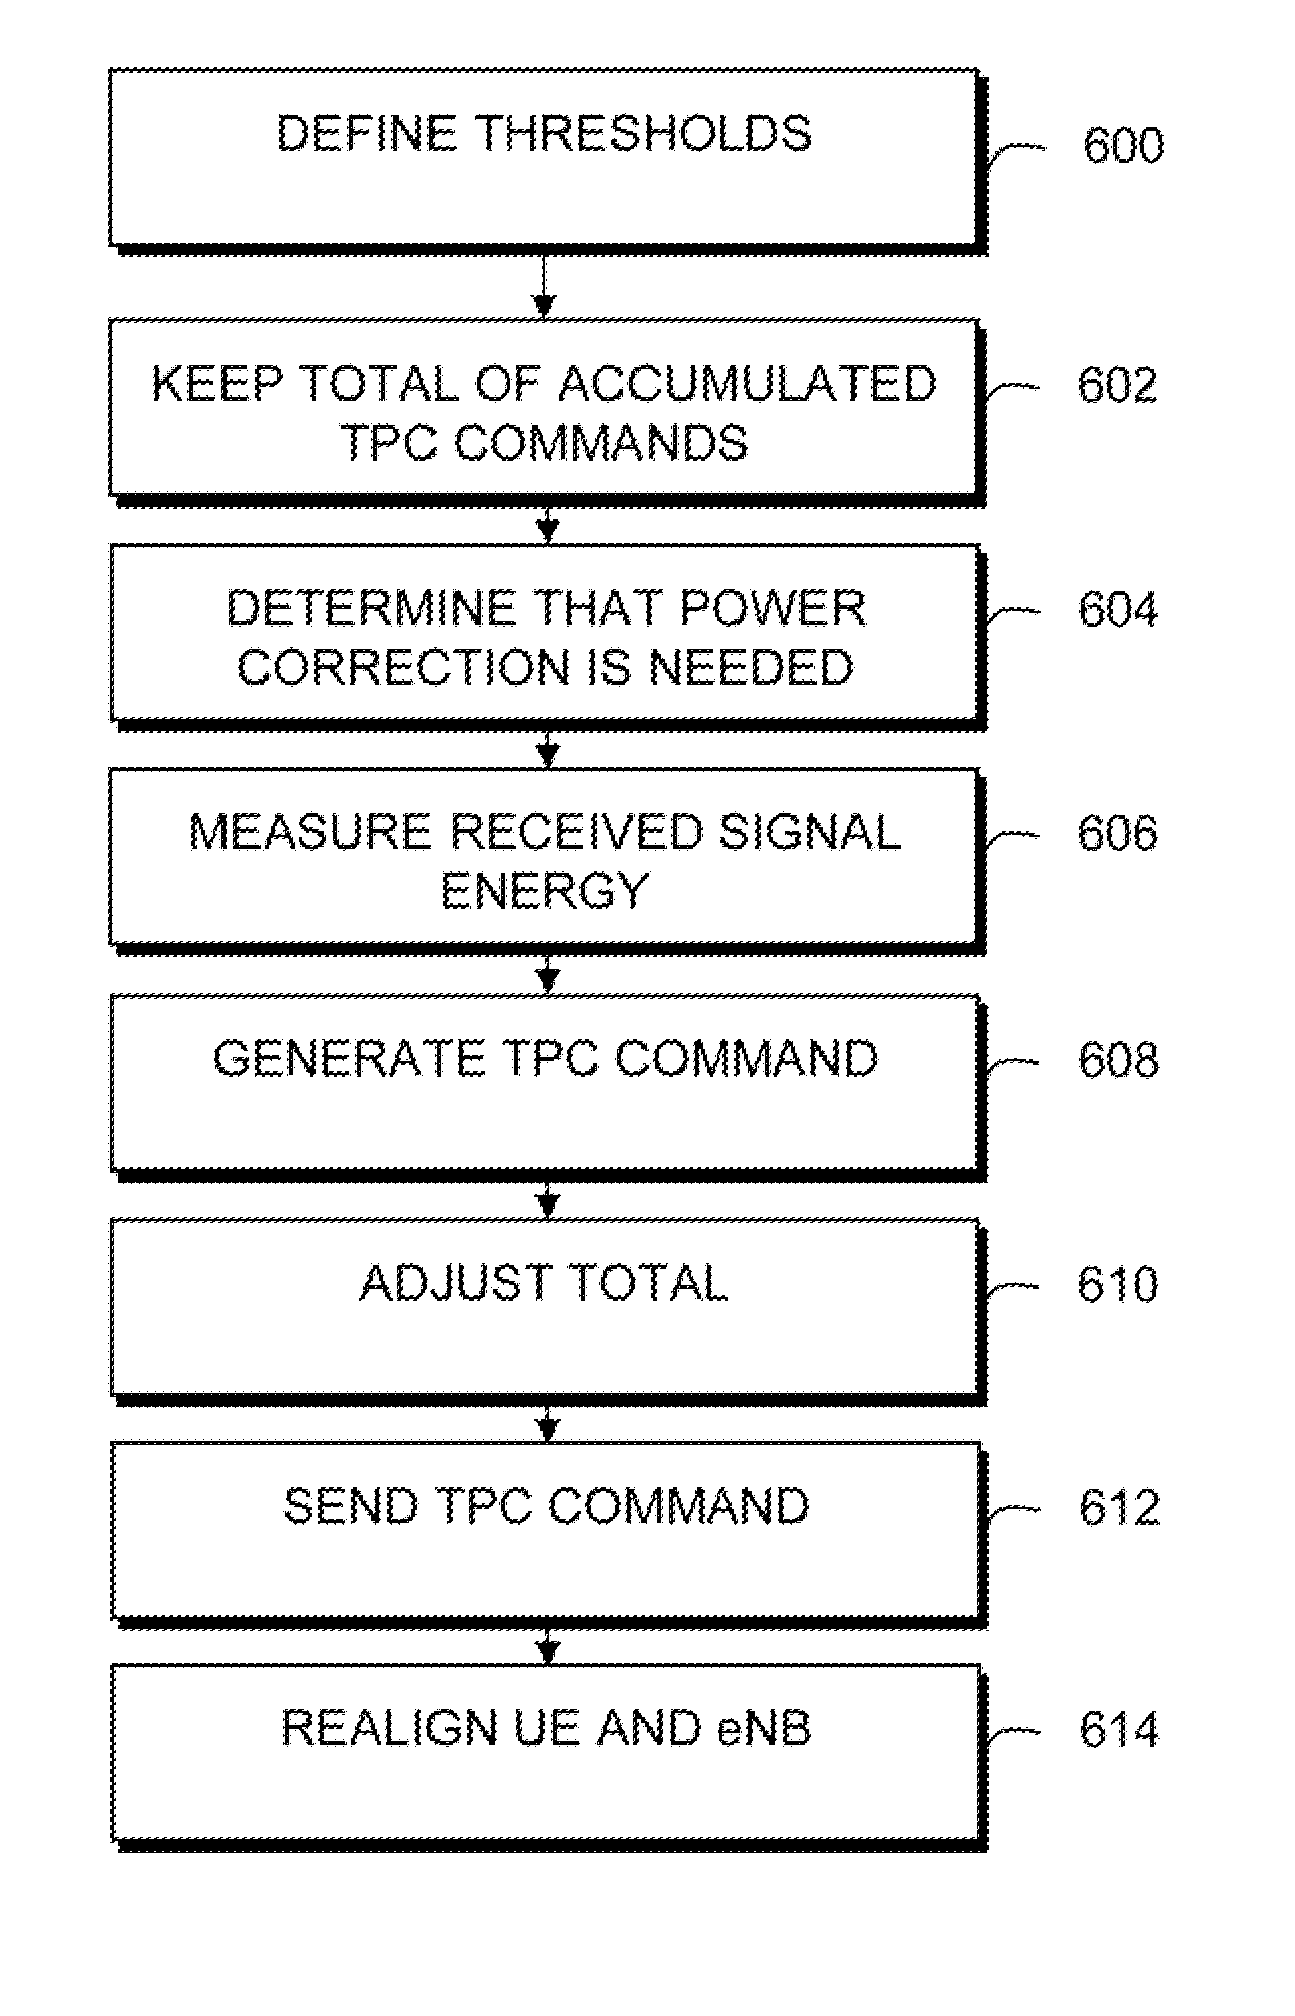 Uplink power alignment estimation in a communication system